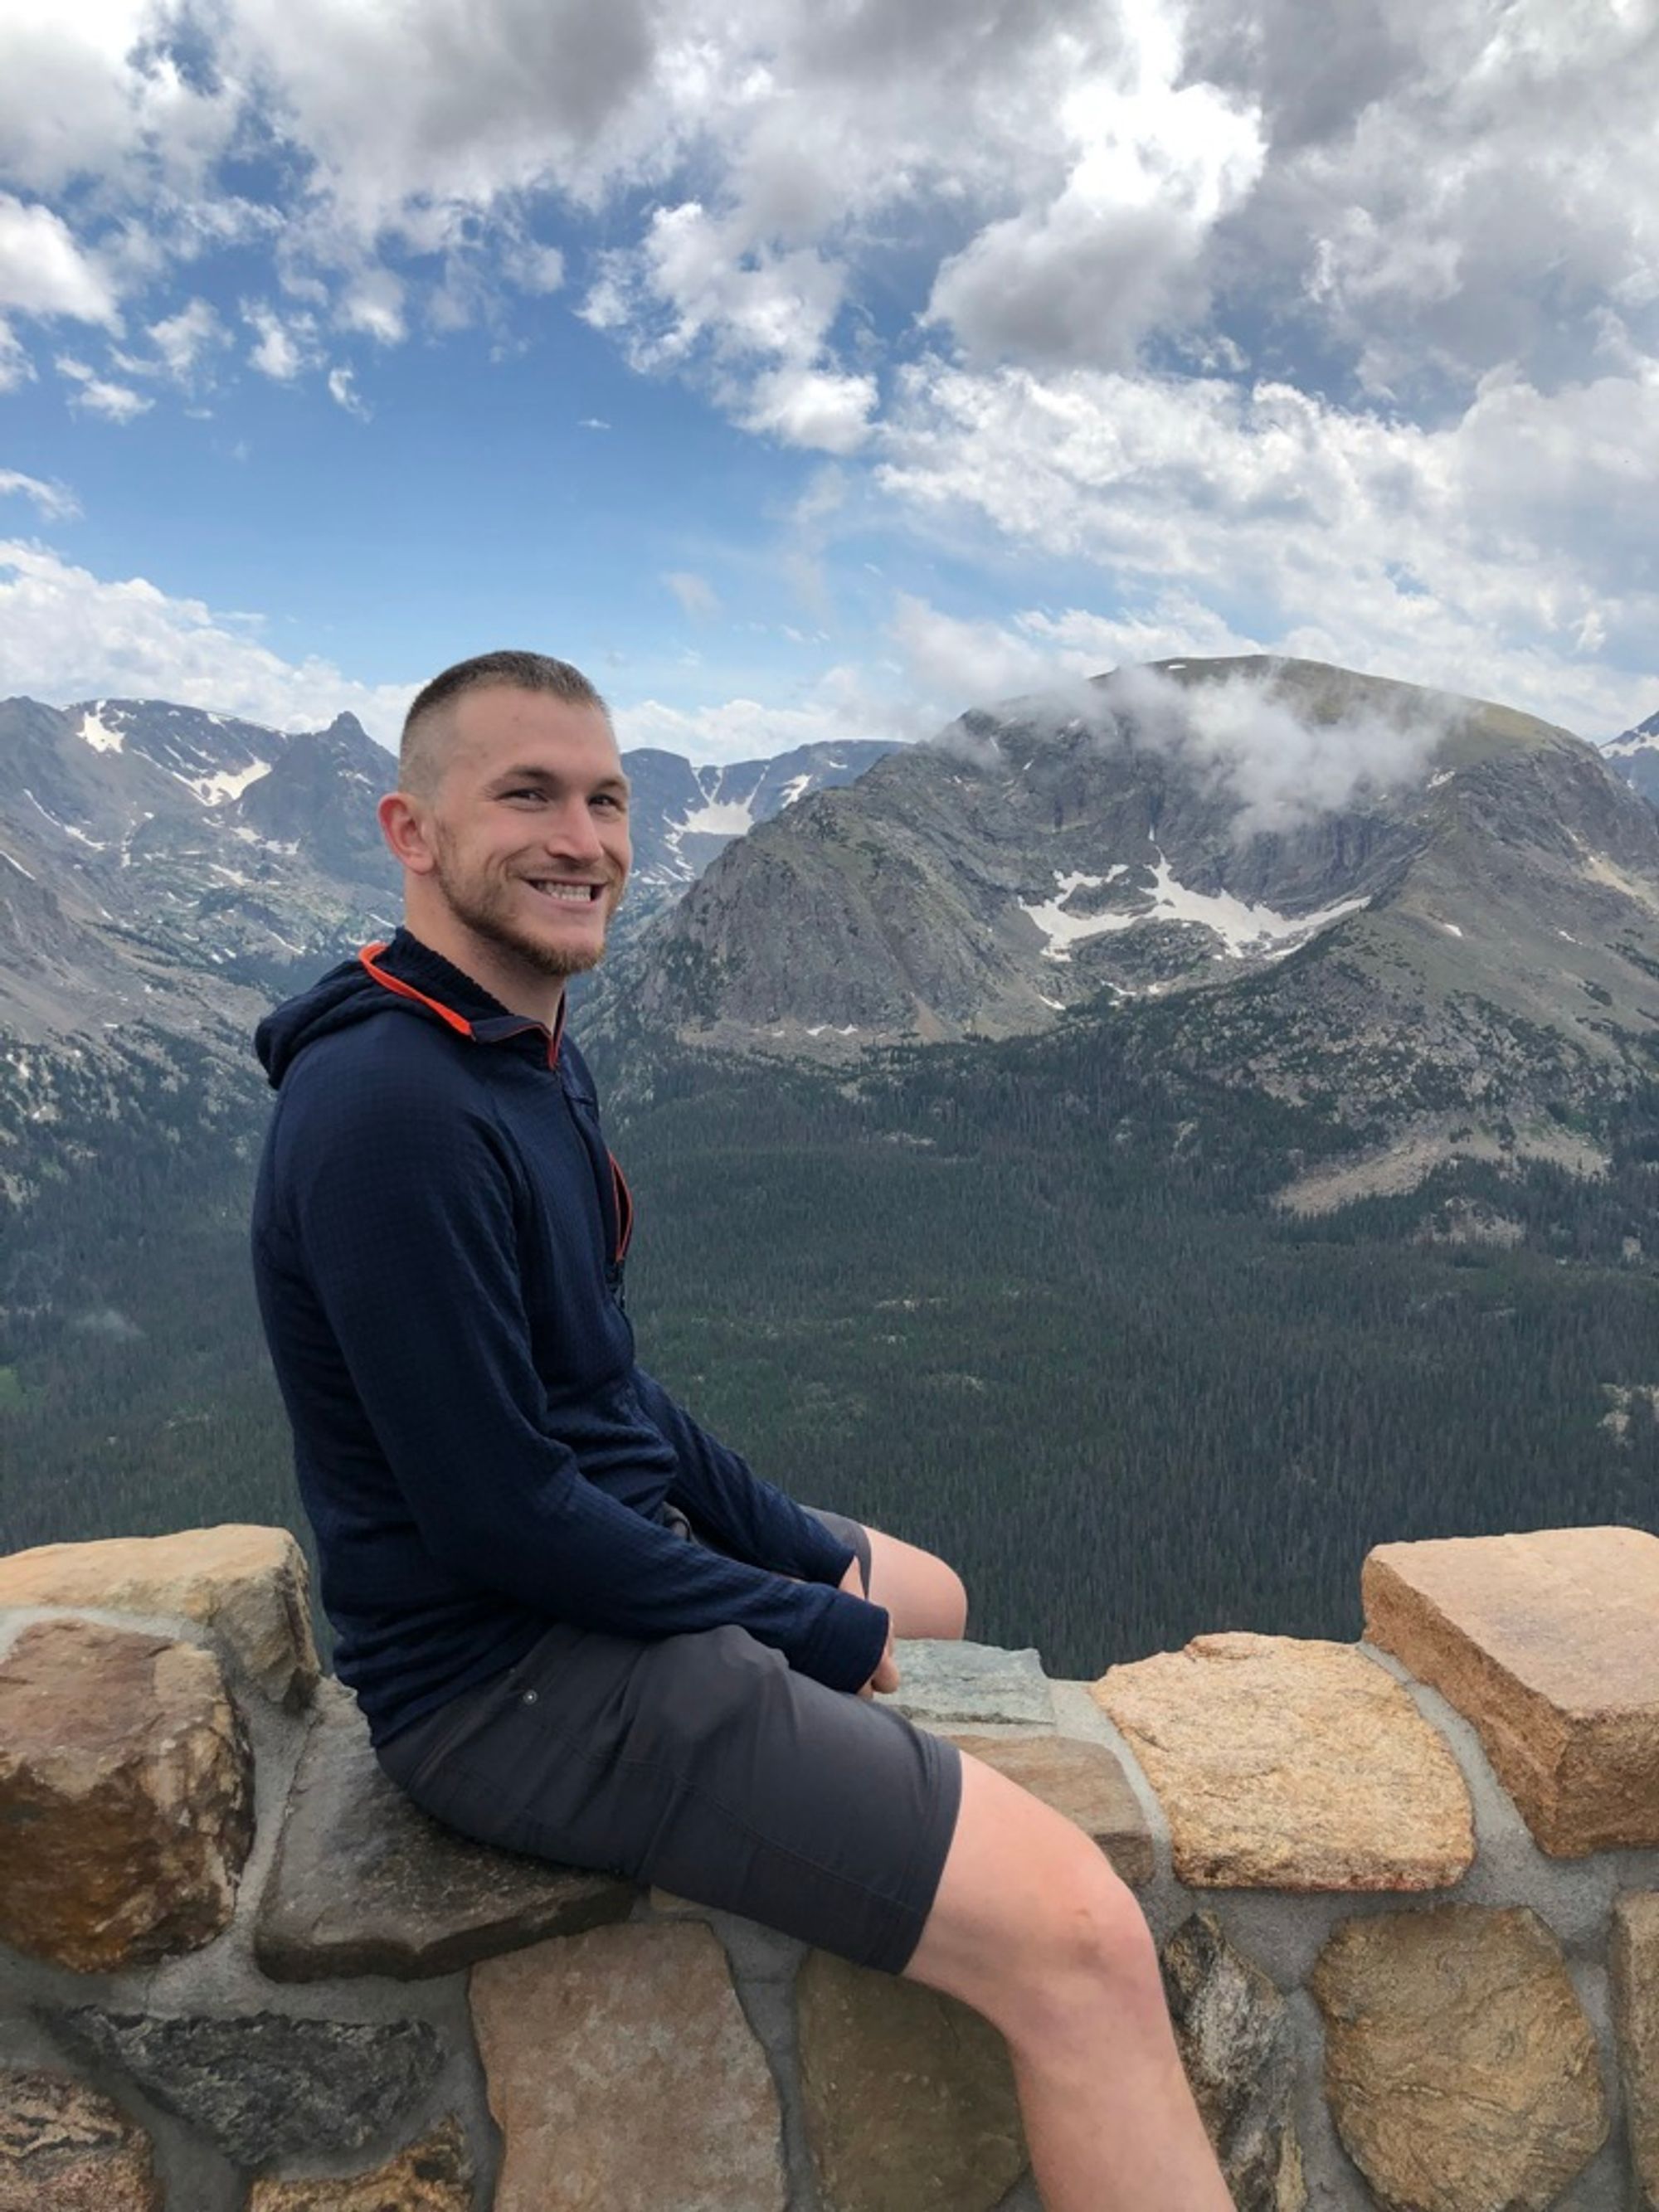 Me, sitting on a stone wall, overlooking the Rocky Mountains